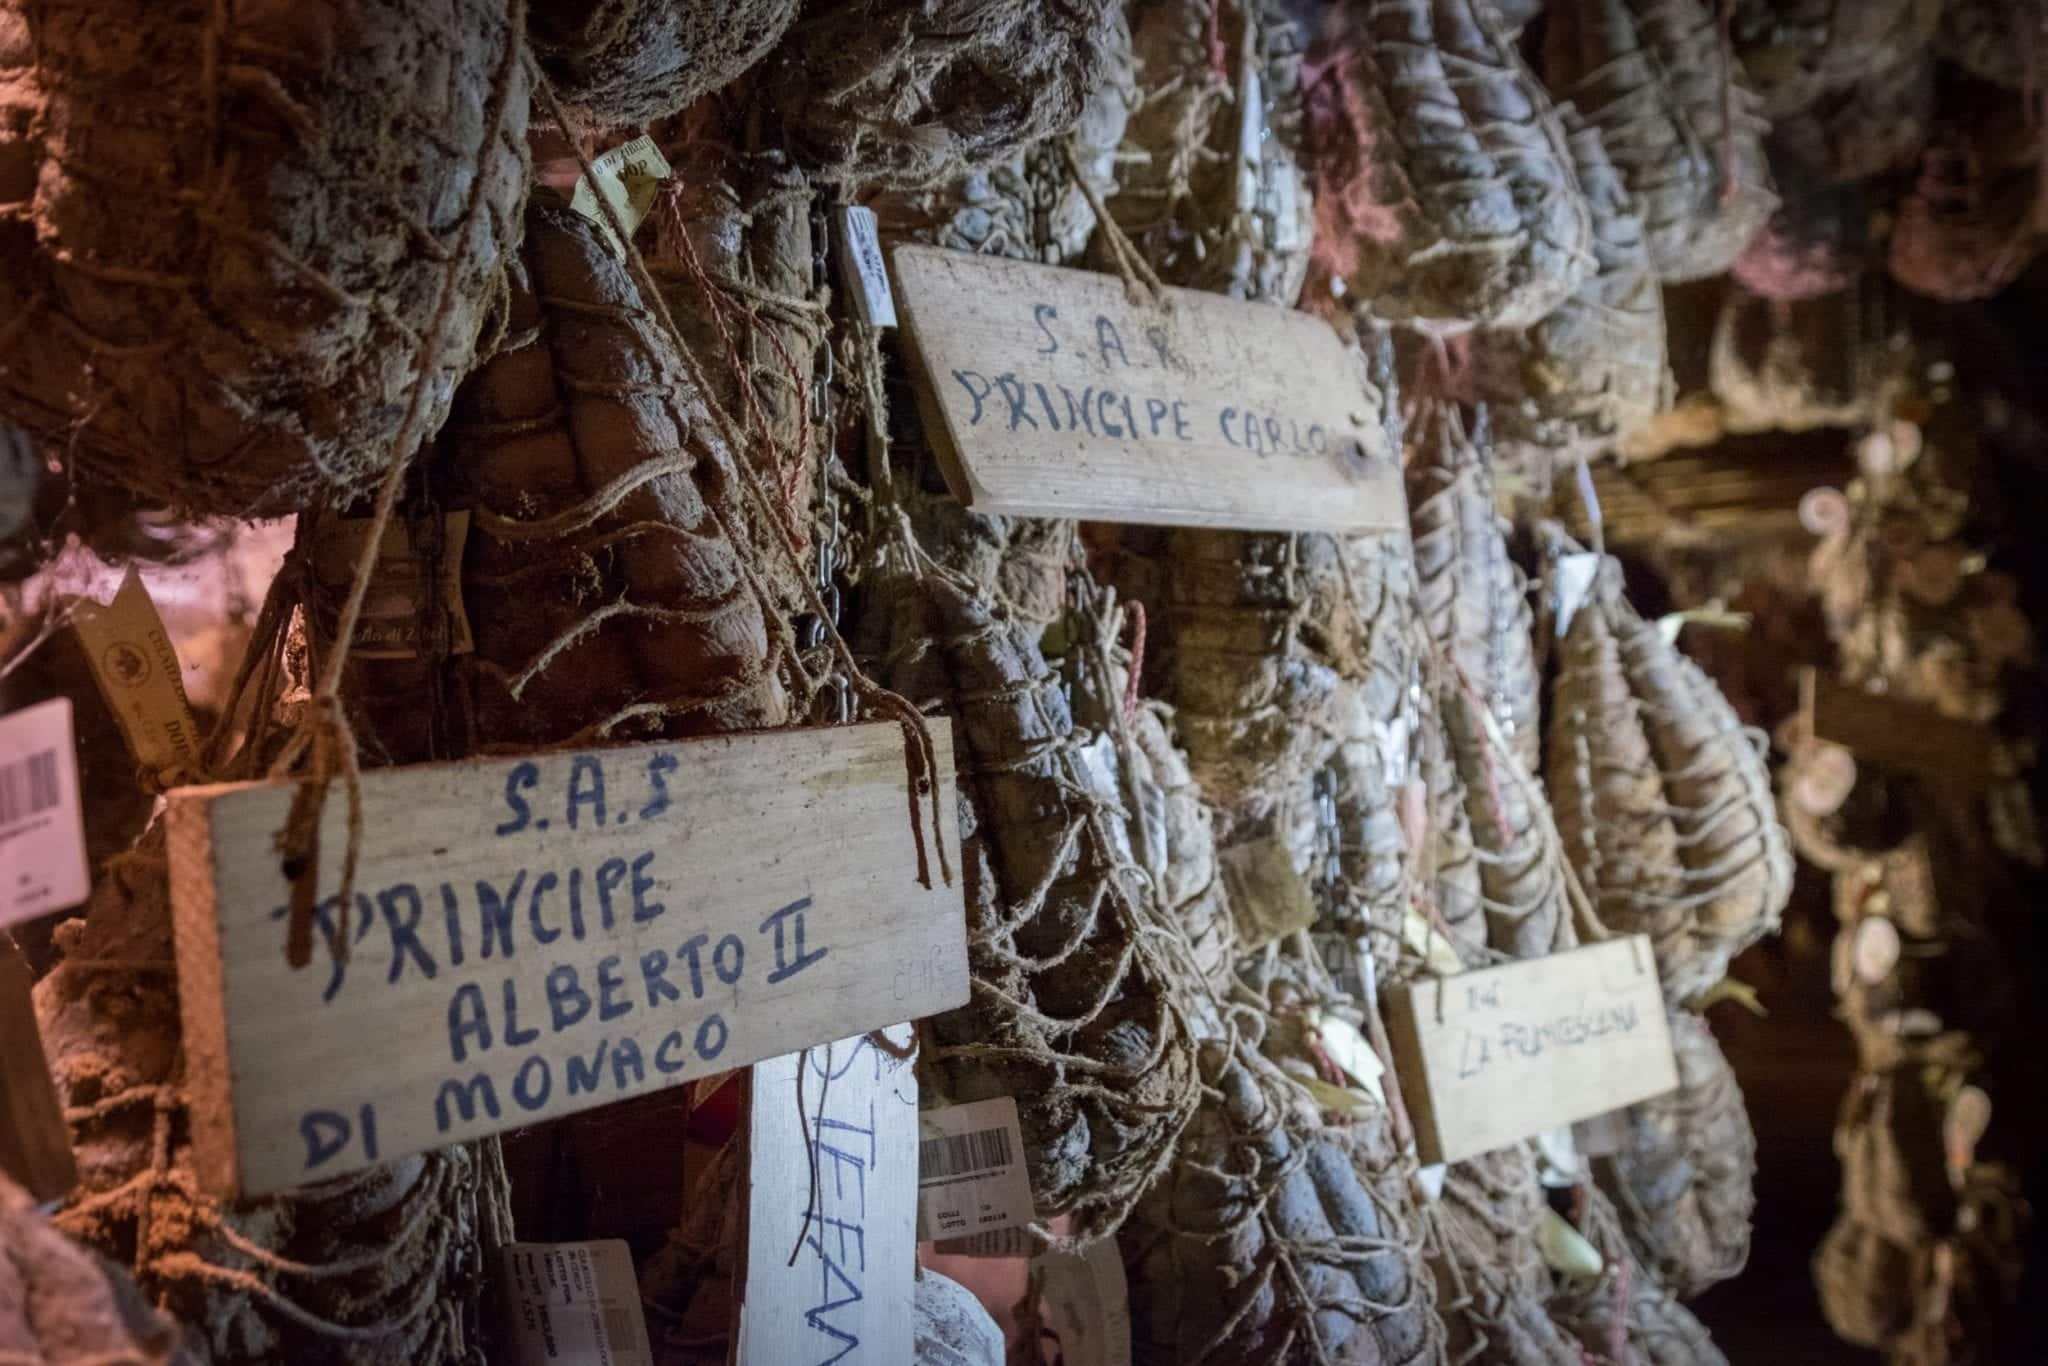 Hanging culatello in the basement, some labeled with "Principe Alberto II" and "Principe Carlo" for Prince Albert and Prince Charles.